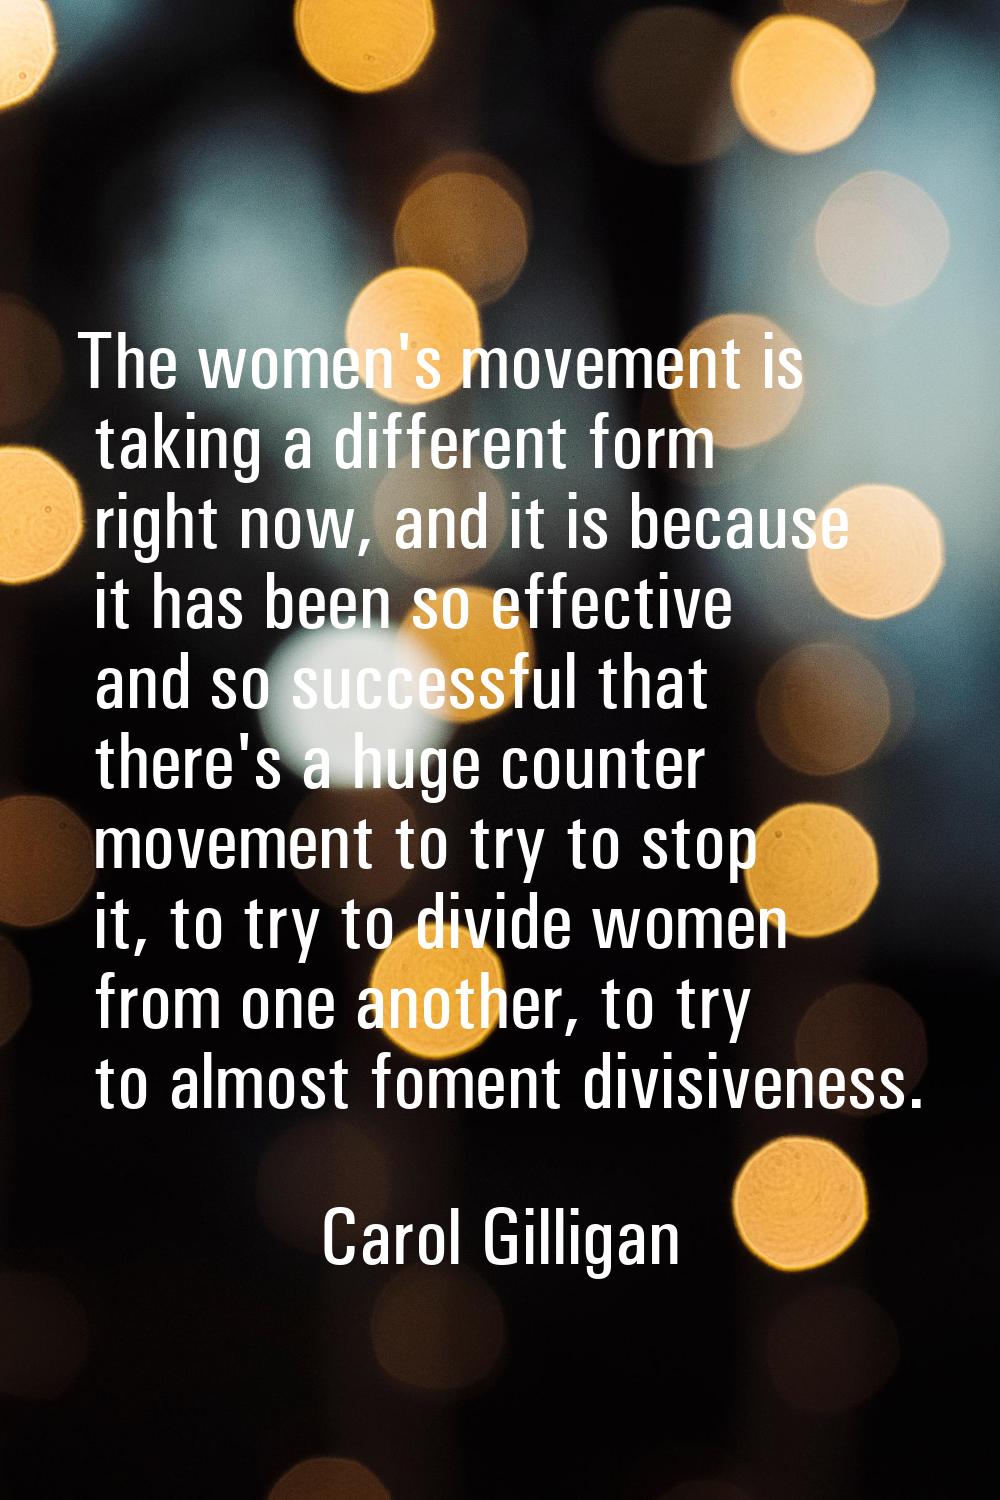 The women's movement is taking a different form right now, and it is because it has been so effecti